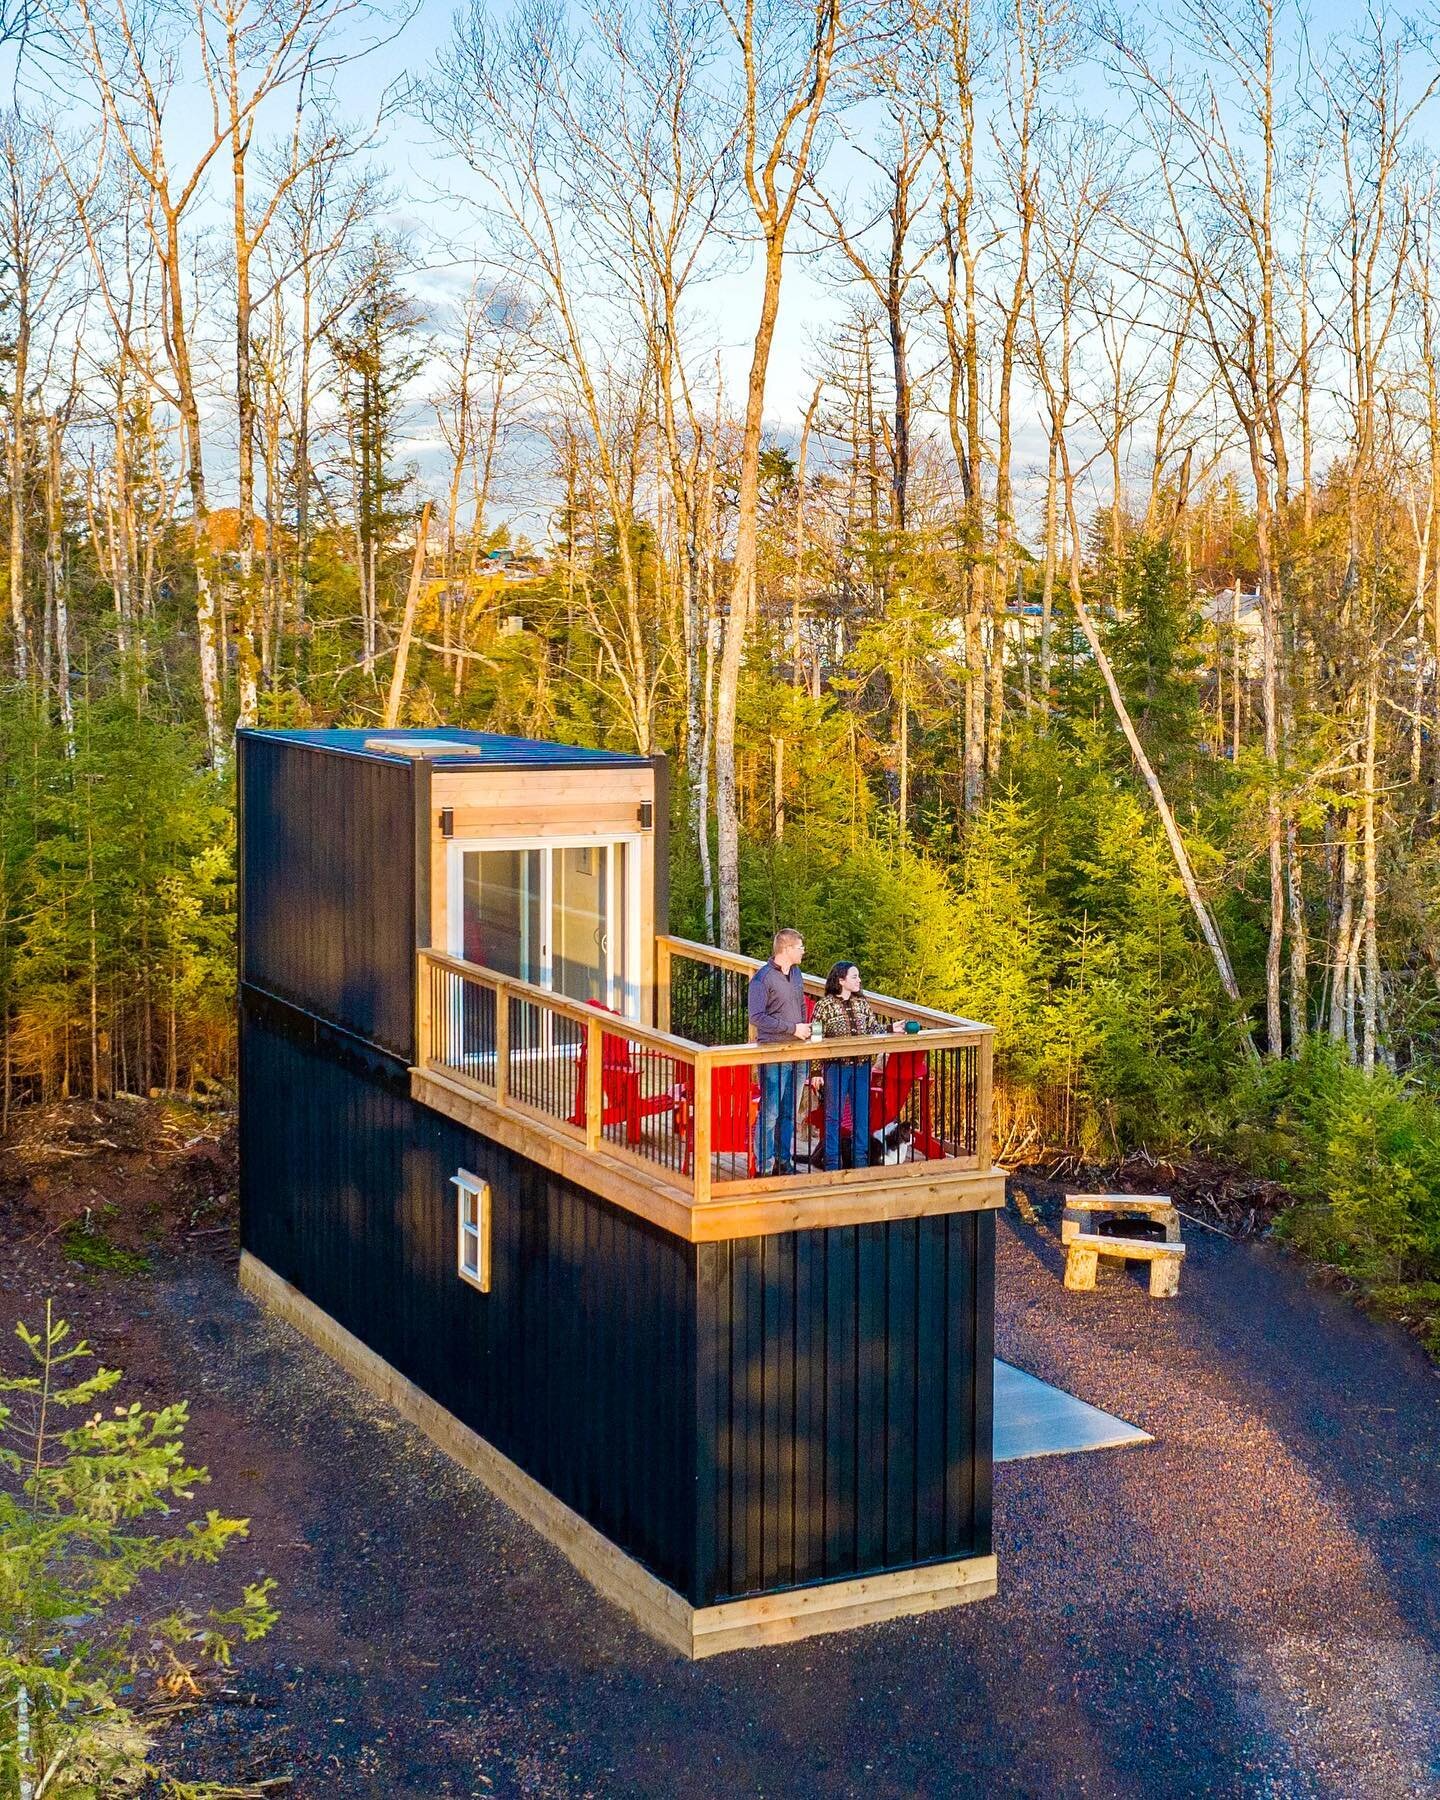 Seeking: comfort, wilderness, adventure, bonfires, hot tub evenings, the perfect woodland getaway
📍 @stayatseek 

Shipping container cabin living is pretty tempting after our stay here! 🌿

#stayatseek #truro #wilderness #containercabin #explorecana